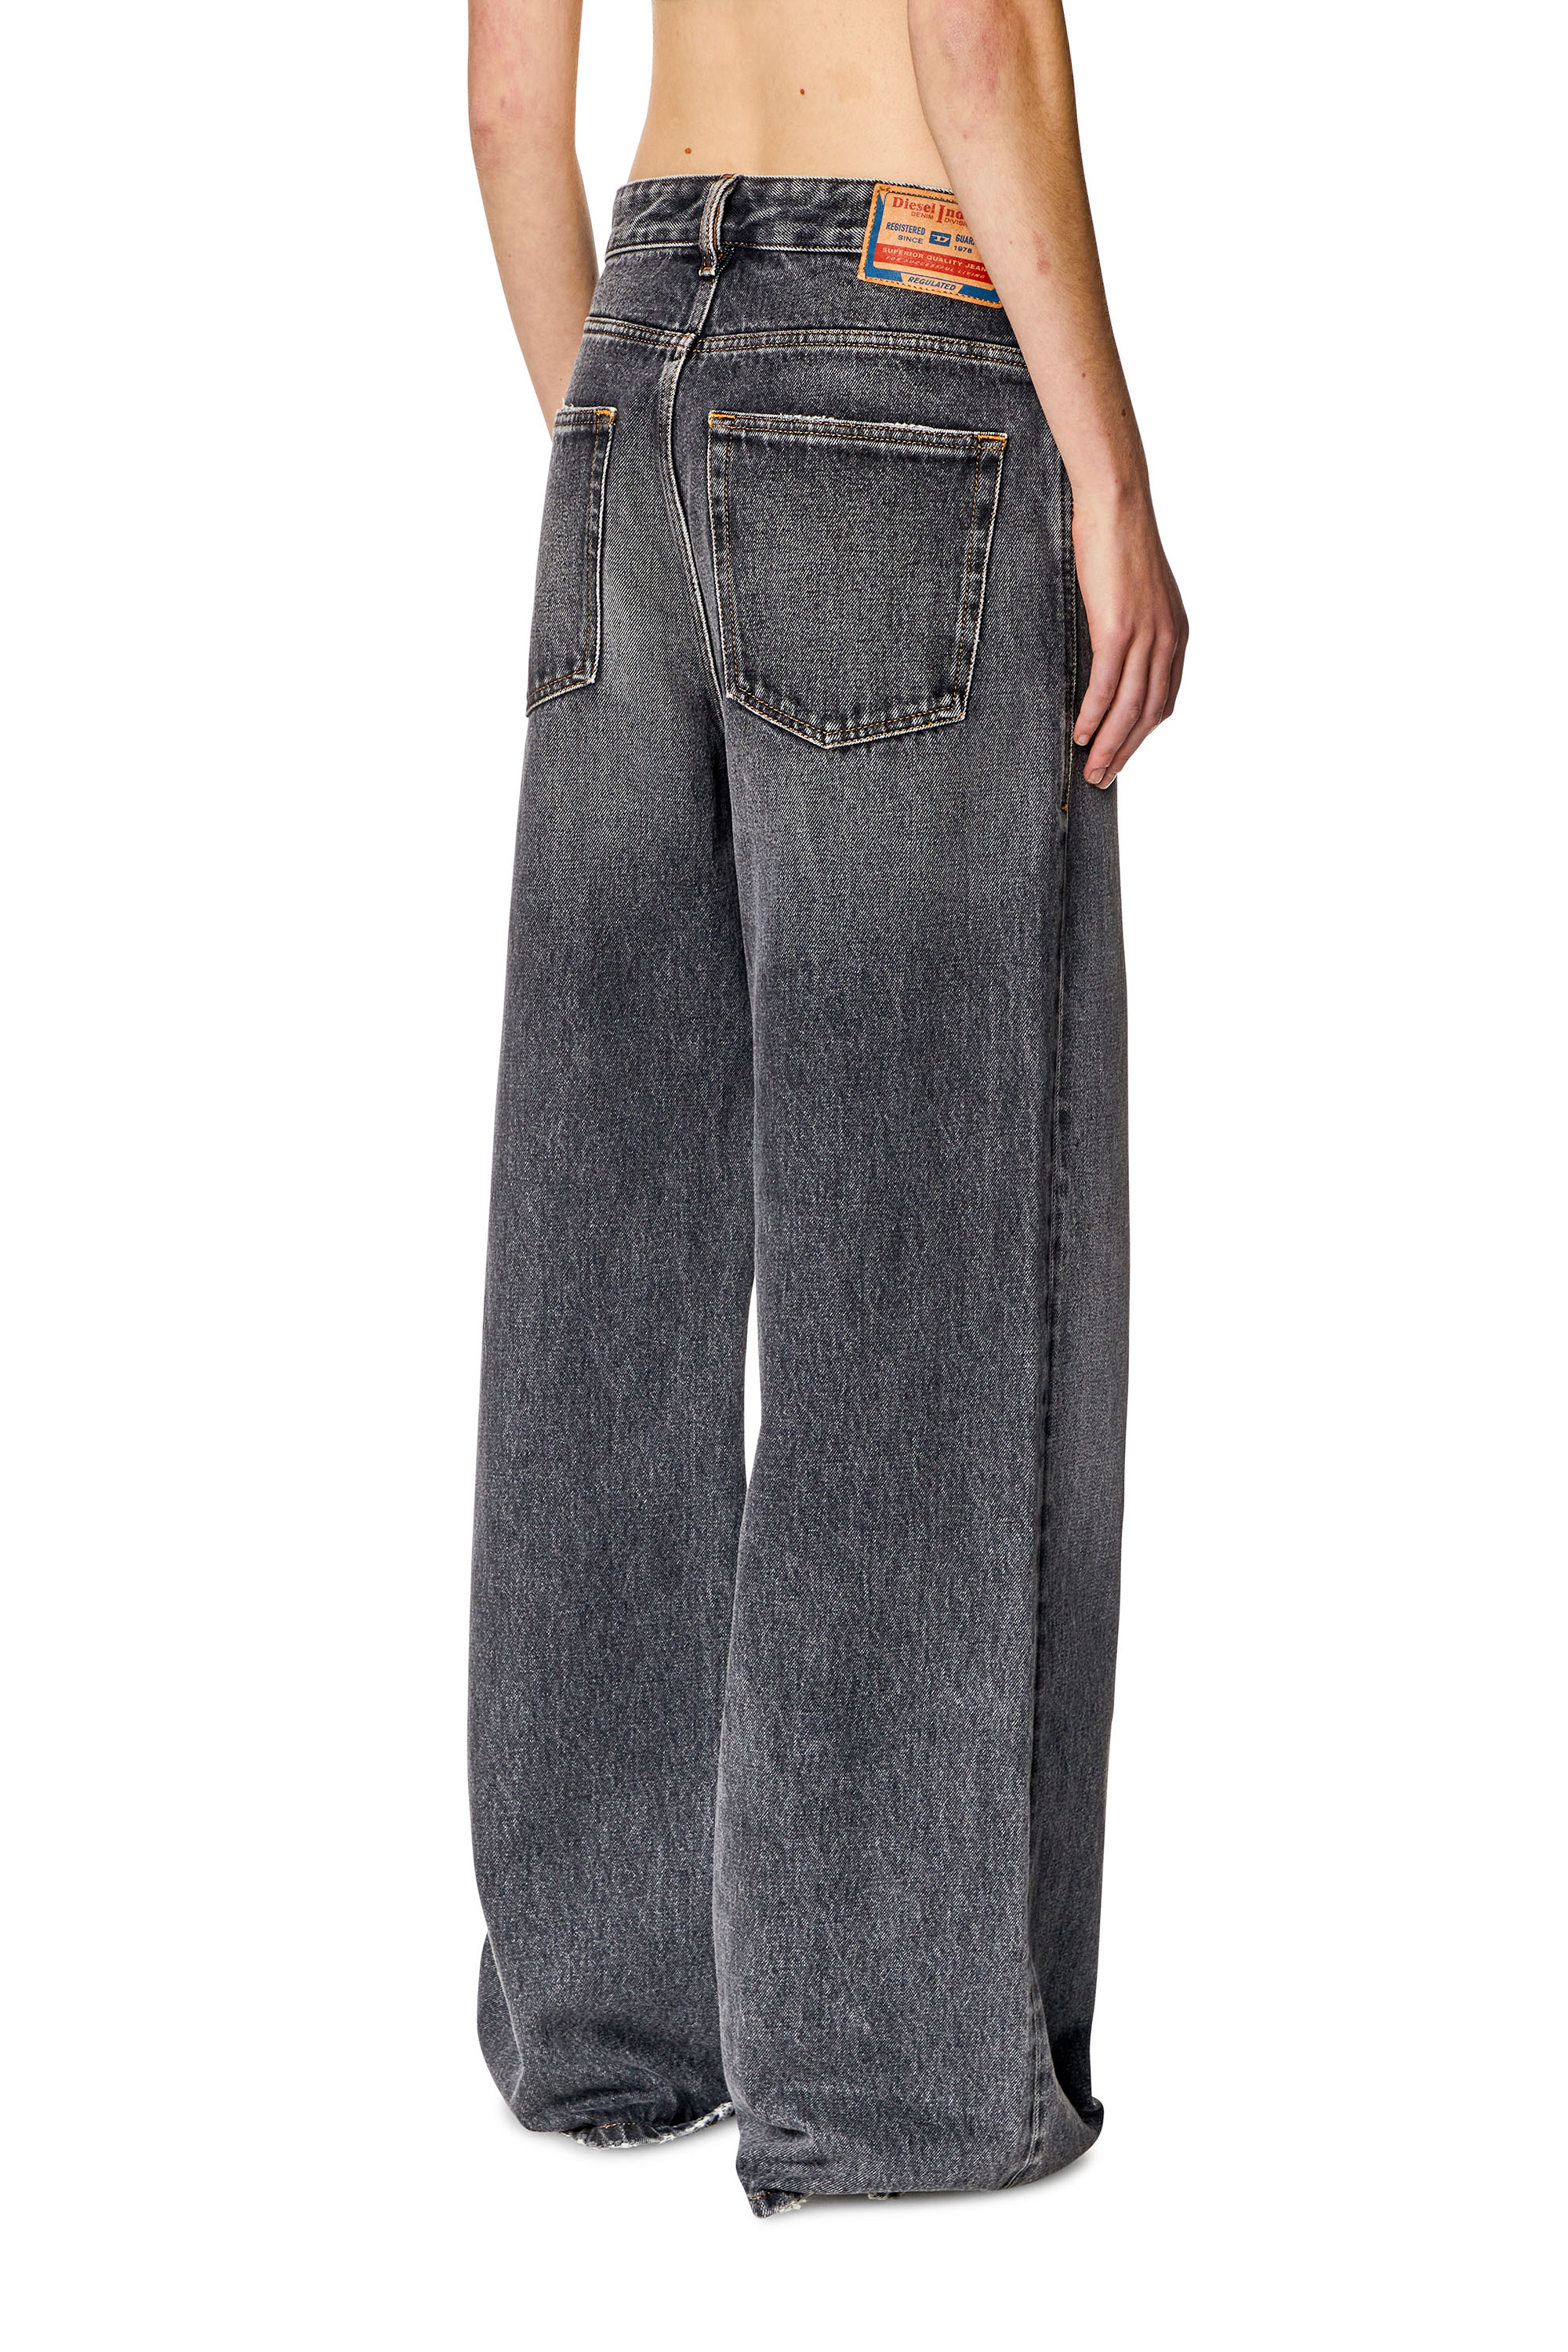 Diesel - Straight Jeans 1996 D-Sire 007F6, Mujer Straight Jeans - 1996 D-Sire in Negro - Image 3